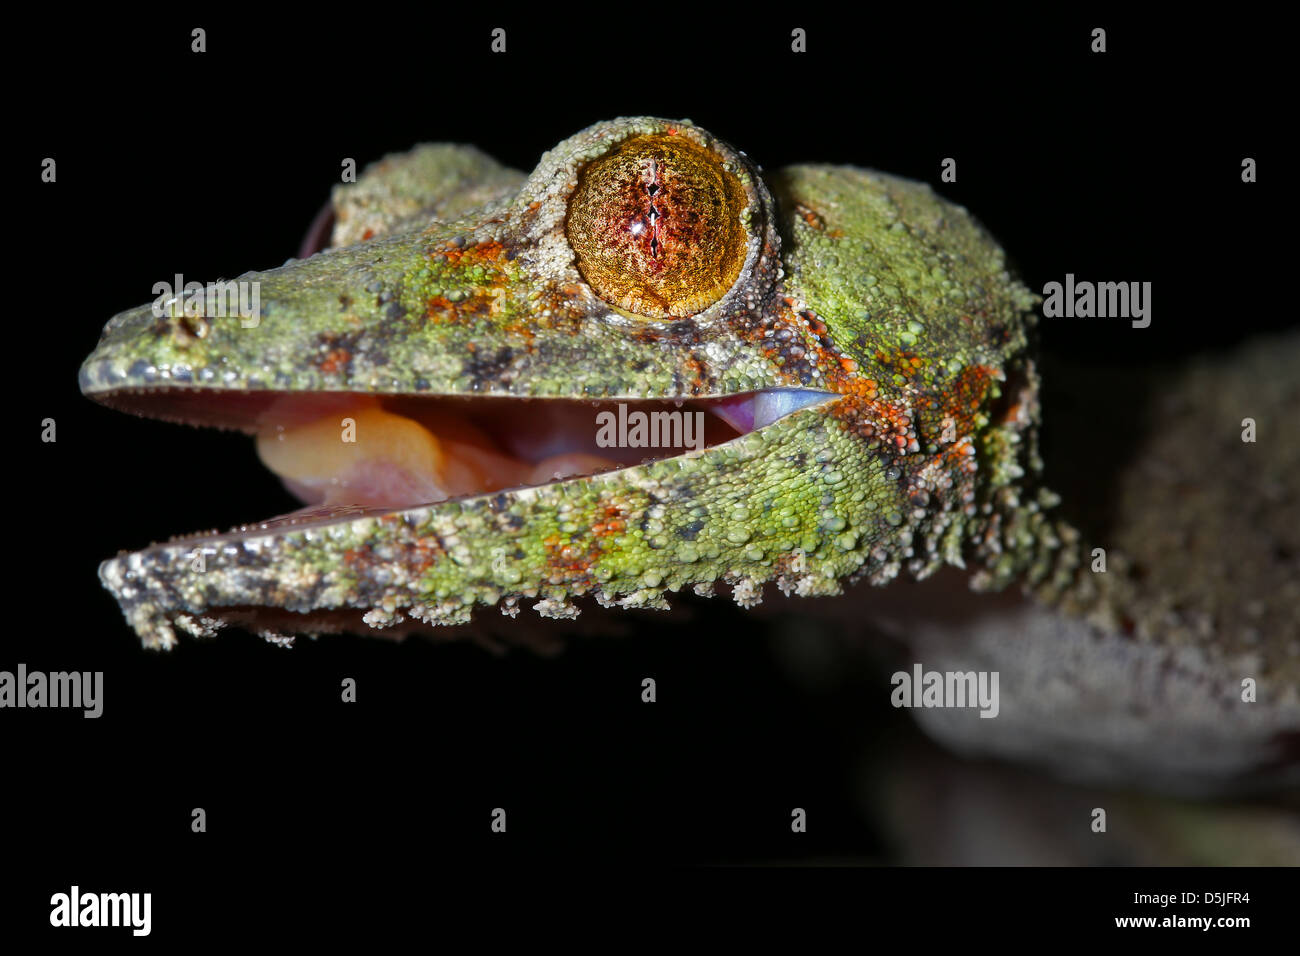 Giant Leaf-tailed Gecko (Uroplatus fimbriatus) in Ranomafana, Madagascar. Gecko opens mouth to clean eye with tongue. Stock Photo